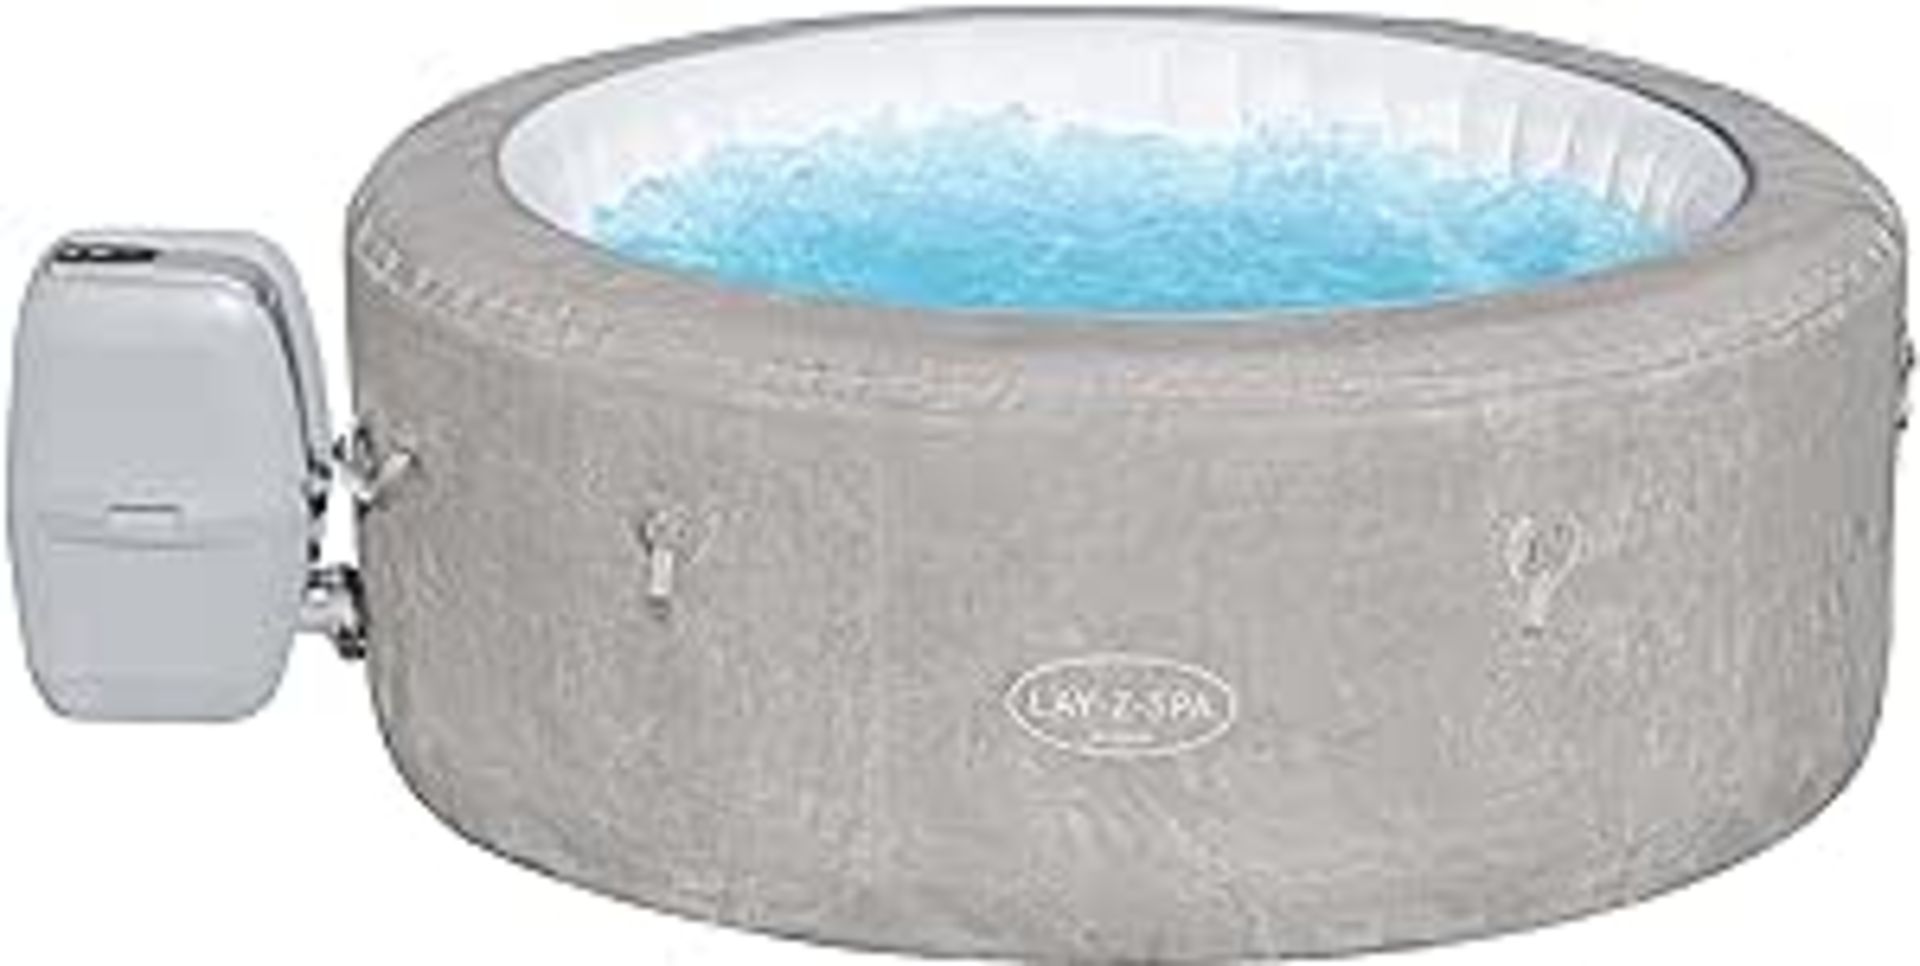 Lay-Z-Spa Zurich 4 person Inflatable hot tub- RRP £323 (LOCATION - H/S R 6.8) The Zurich AirJet™